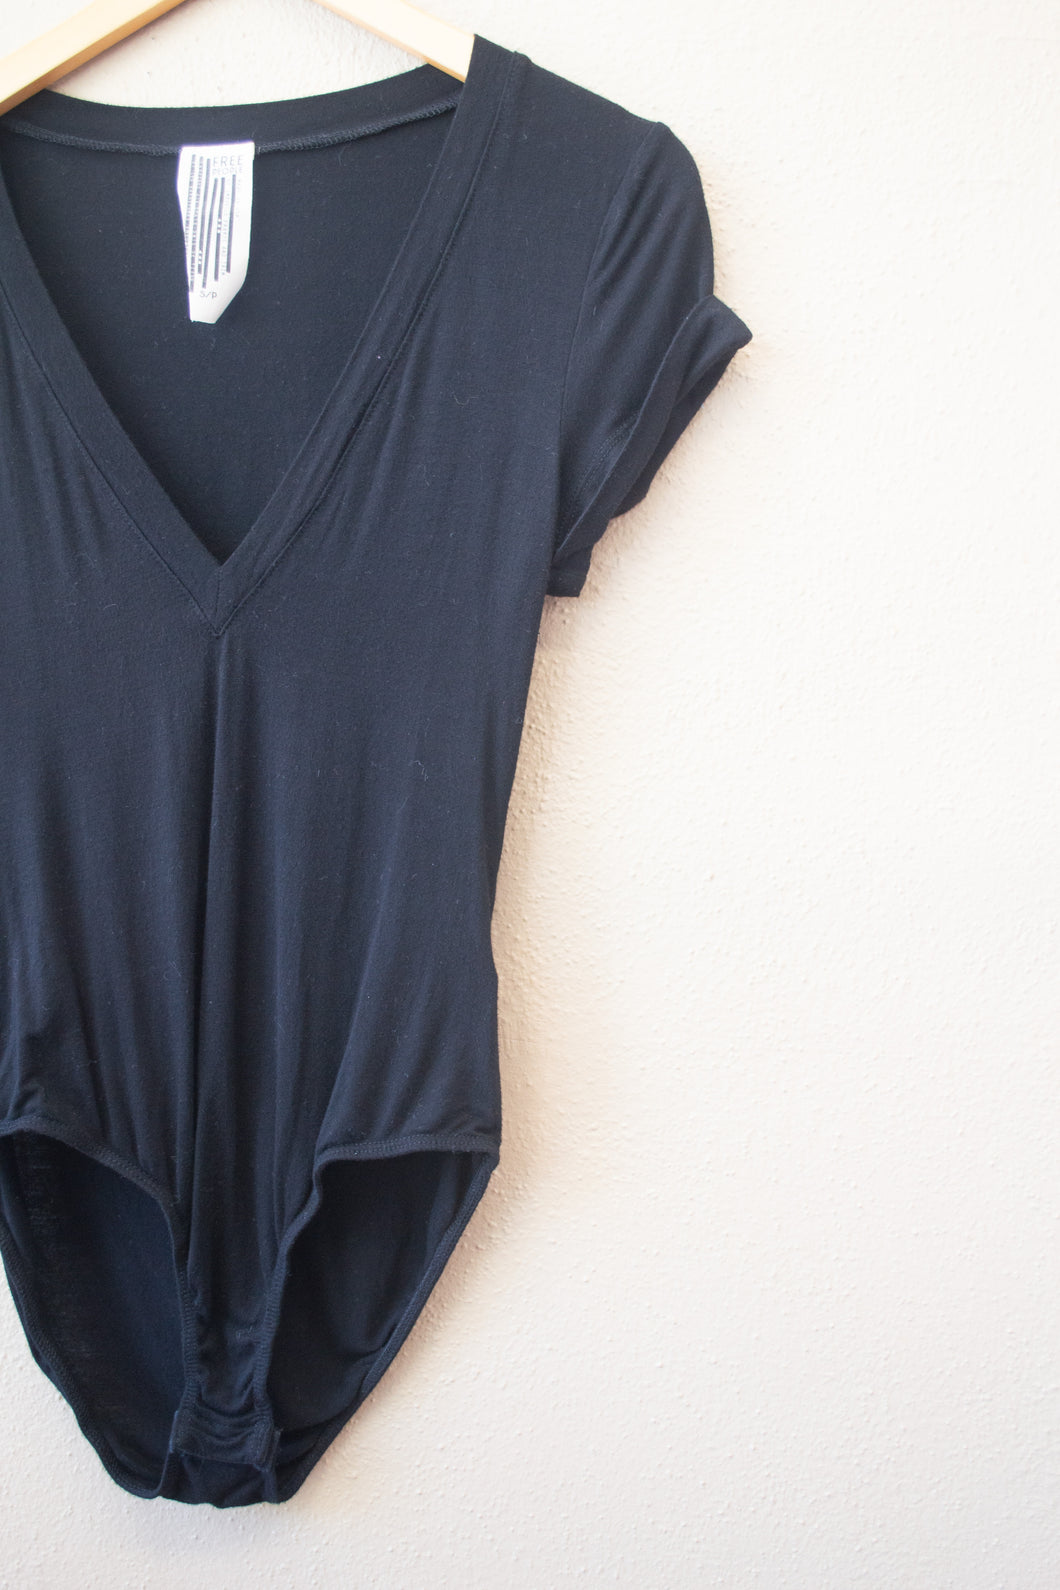 Free People Size Small V-Neck Bodysuit Top